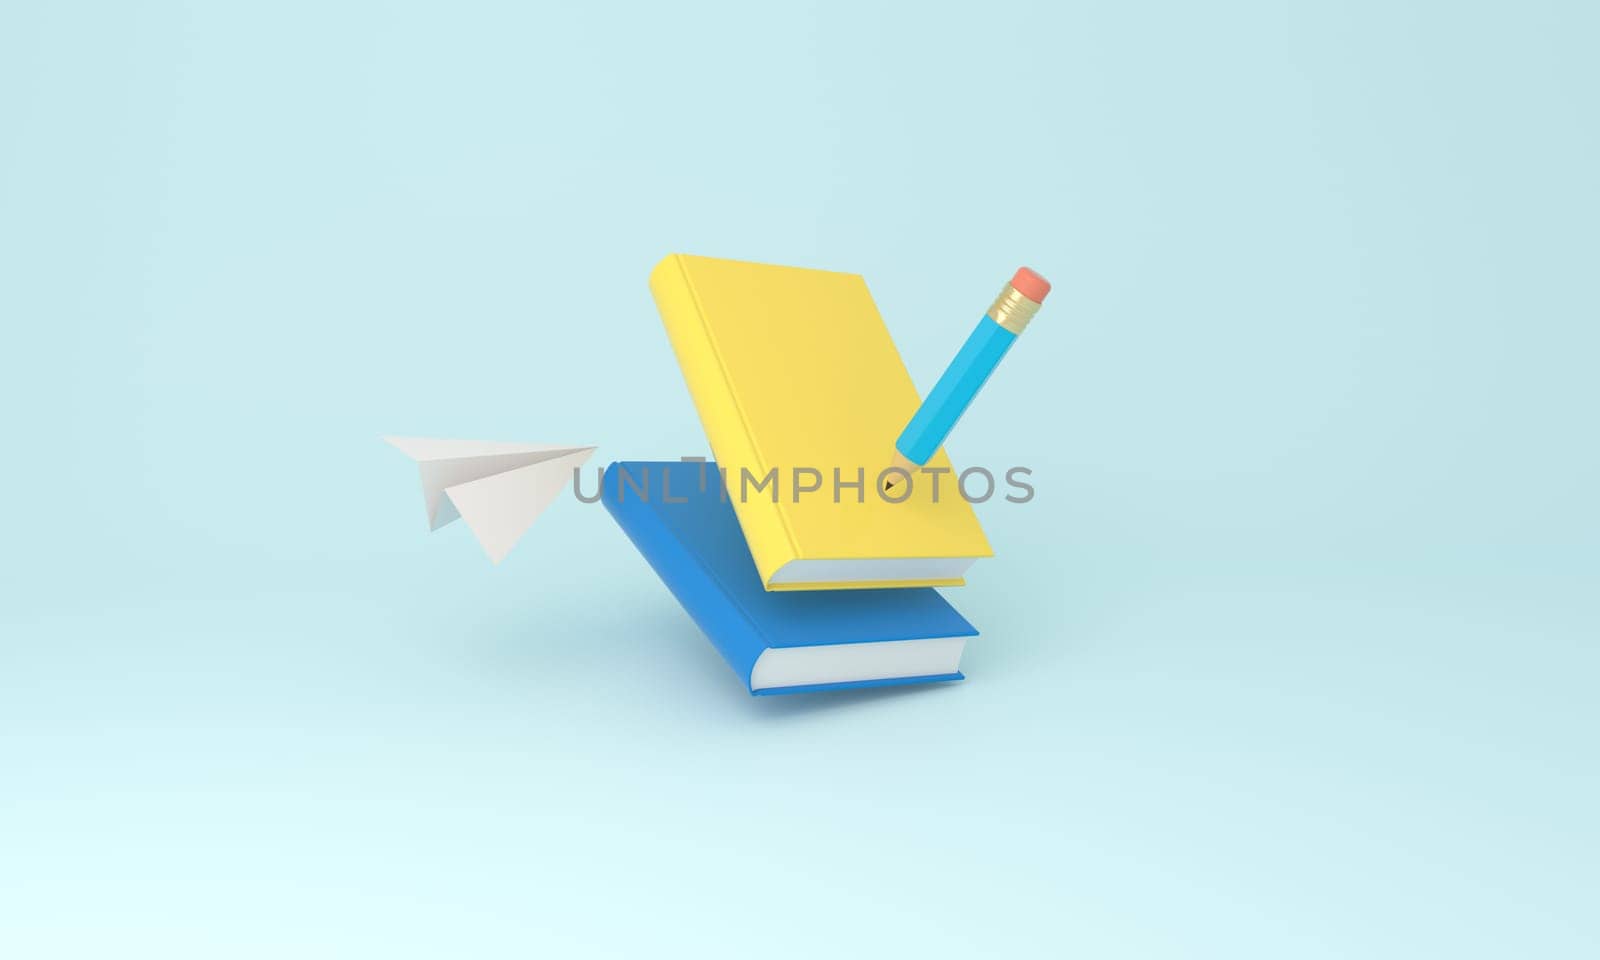 School Essentials - Pencil, Books, and Paper Plane on Blue Background by ImagesRouges